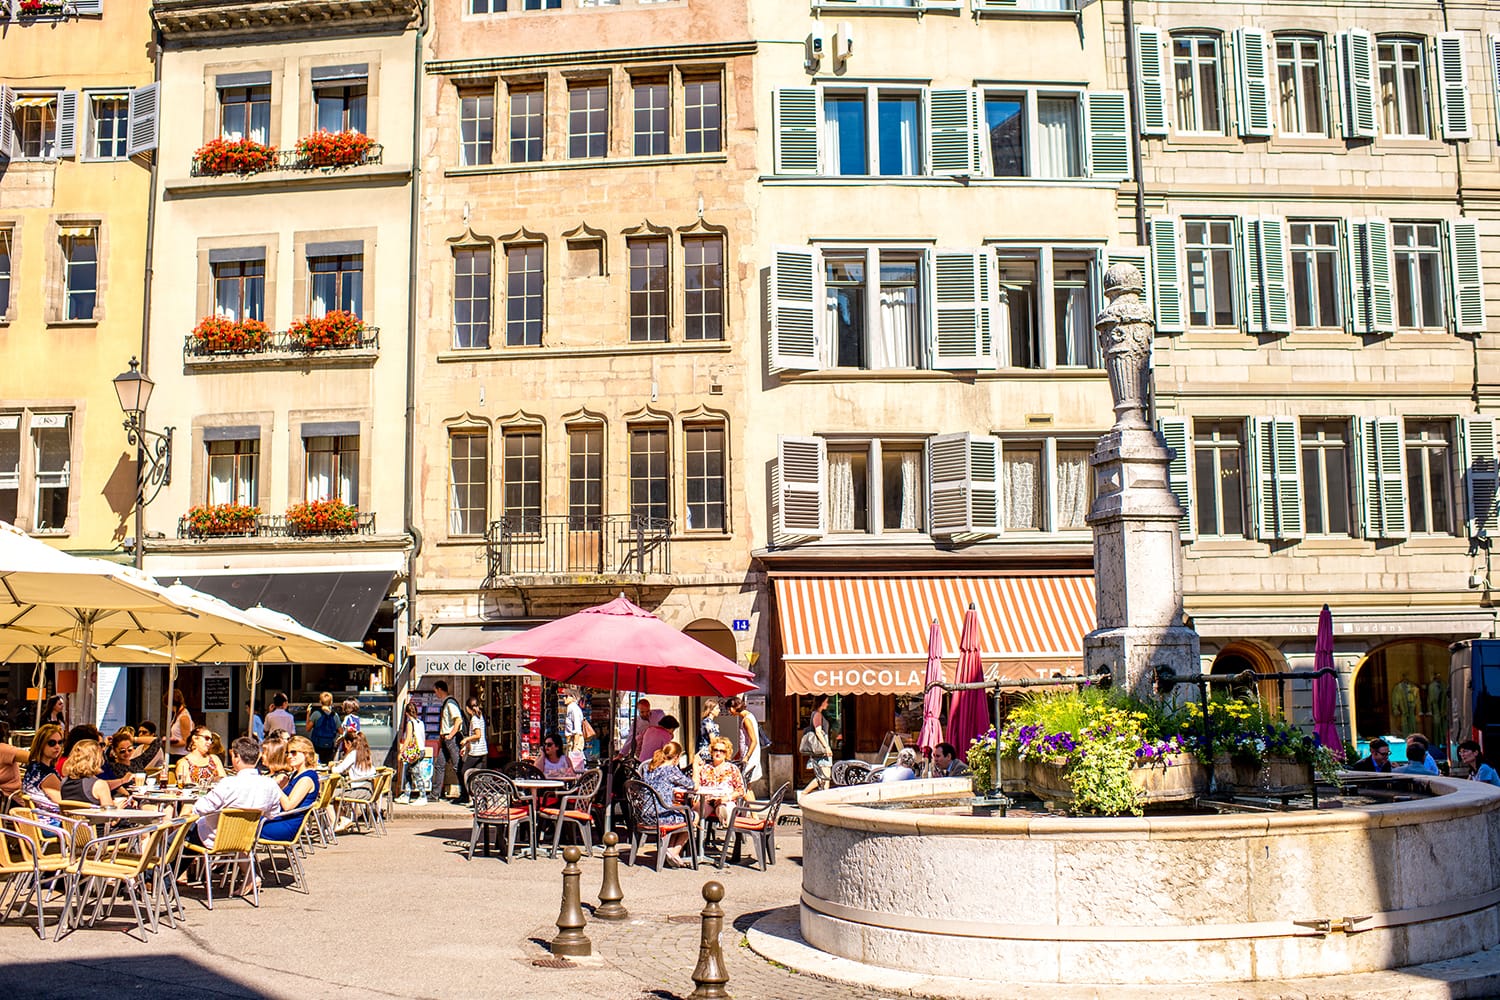 Bourg-de-four square with people sit in cafes and restaurants. It is the oldest square and the most popular meeting place in Geneva, Switzerland